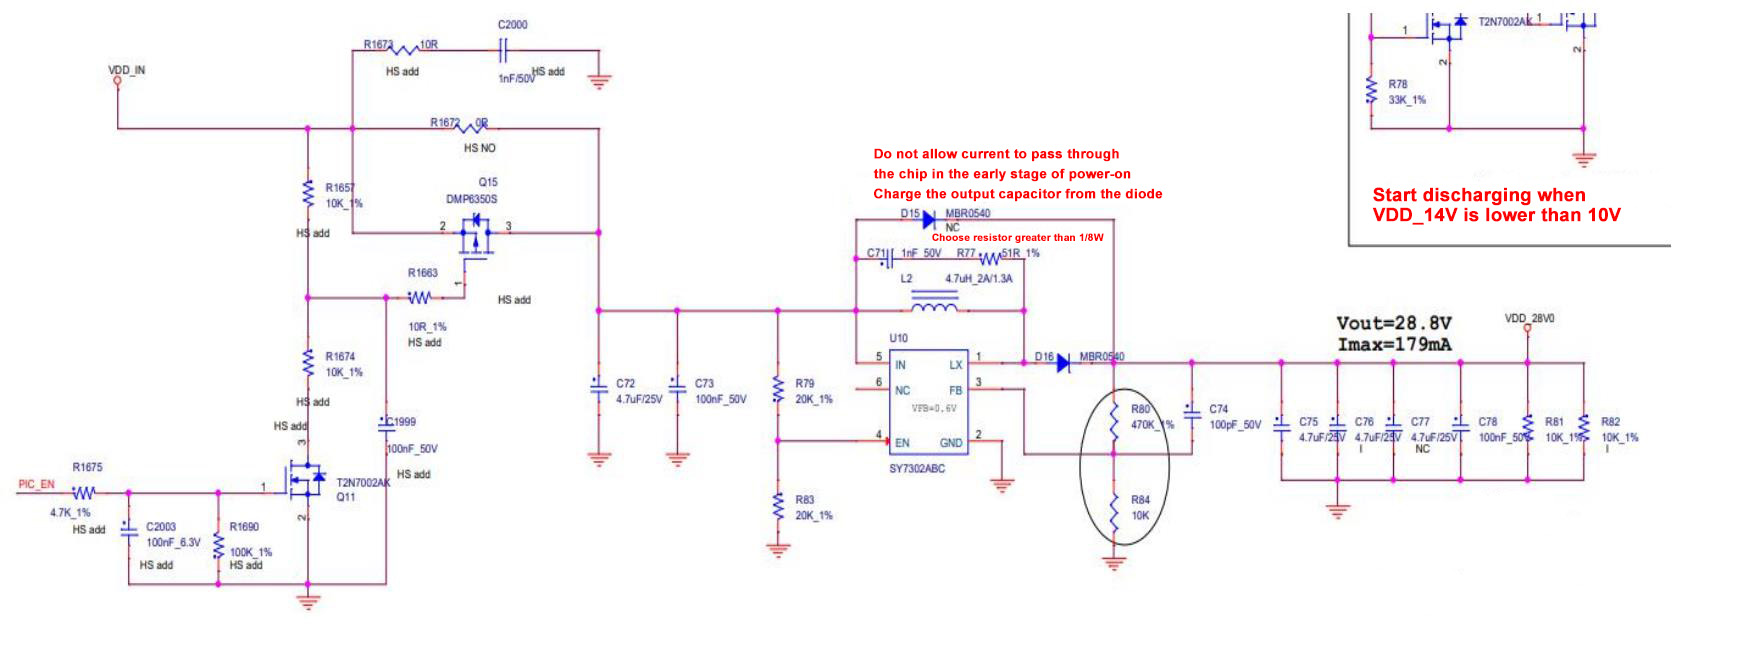 Antminer S19 Hydro power output diagram